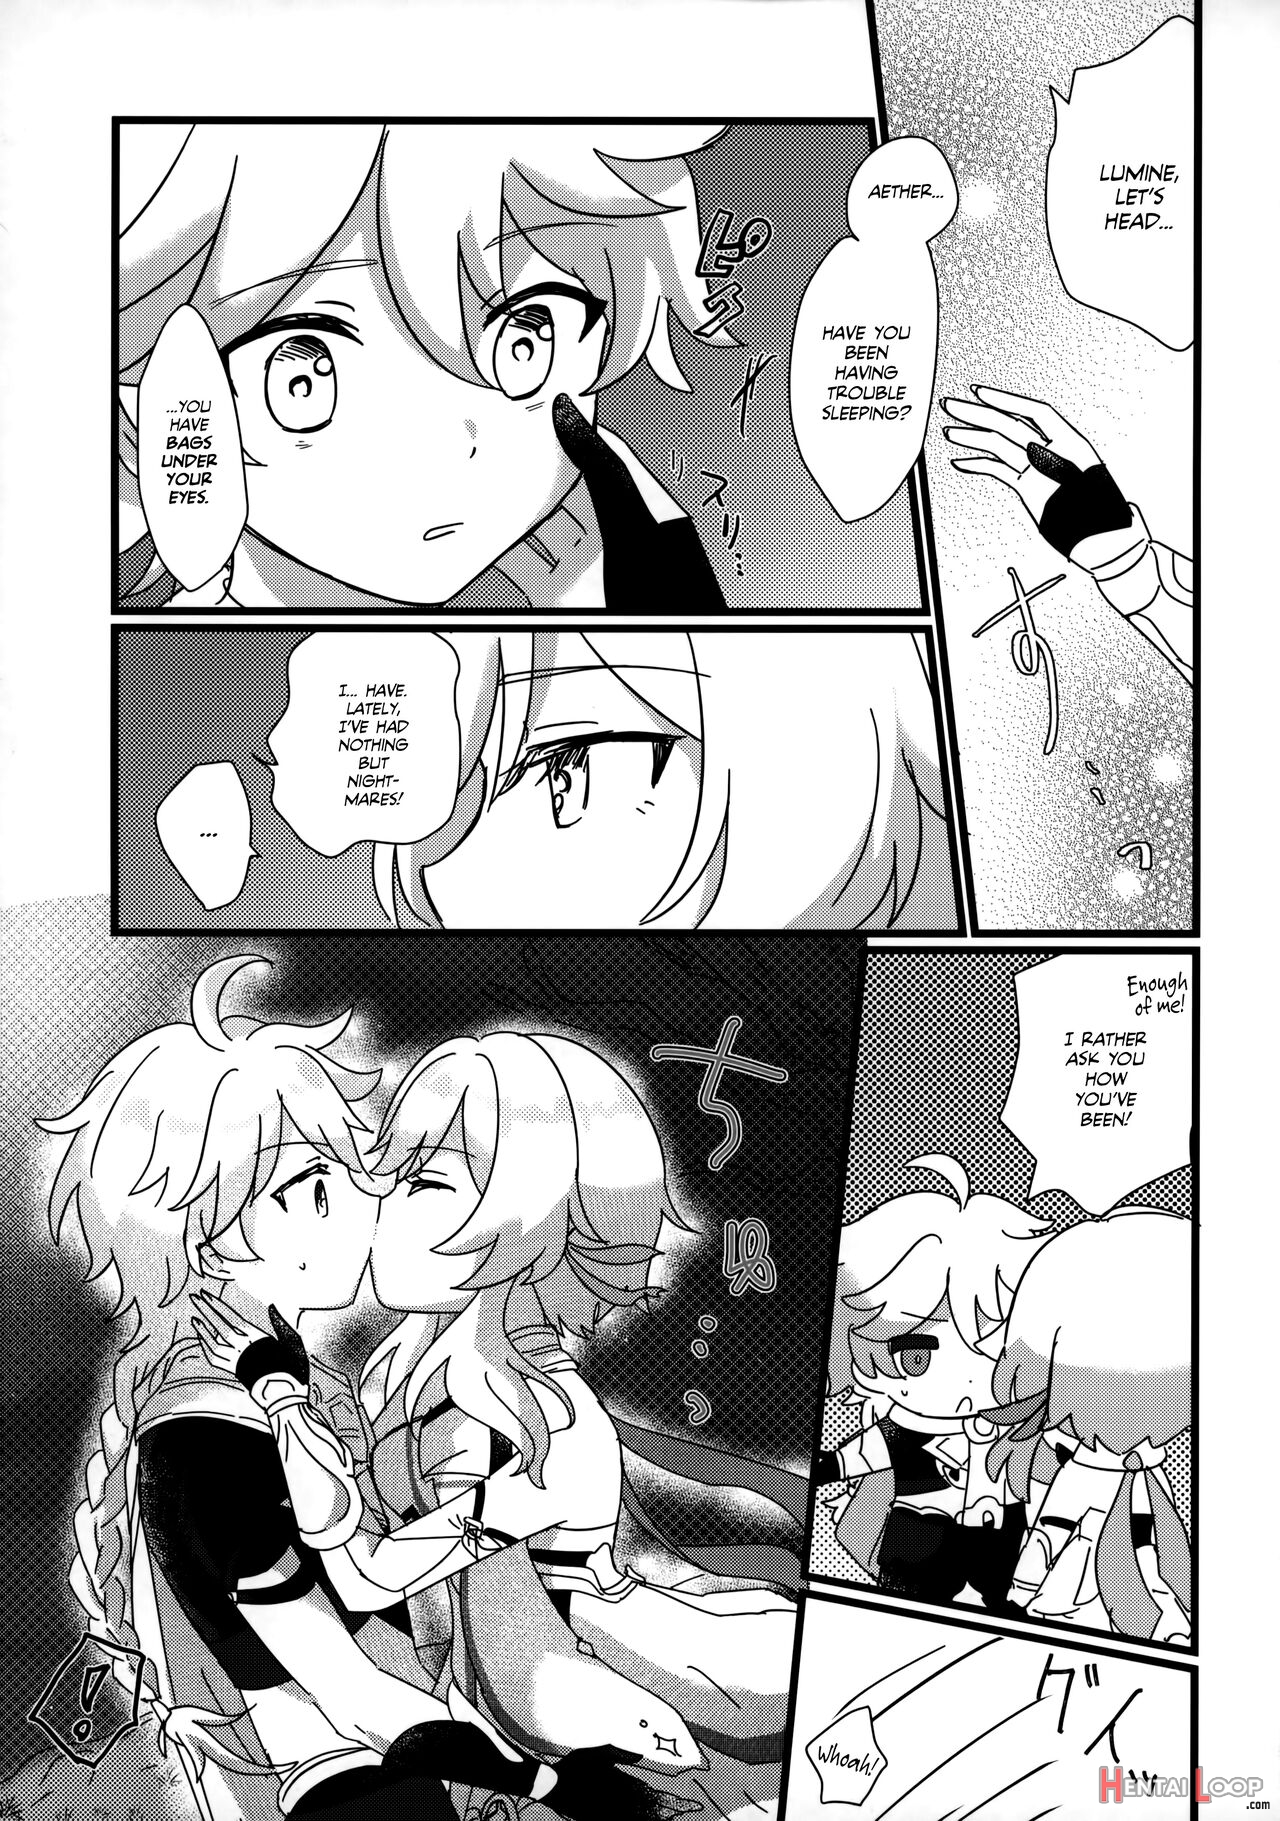 We Meet Again, Onii-chan! page 8